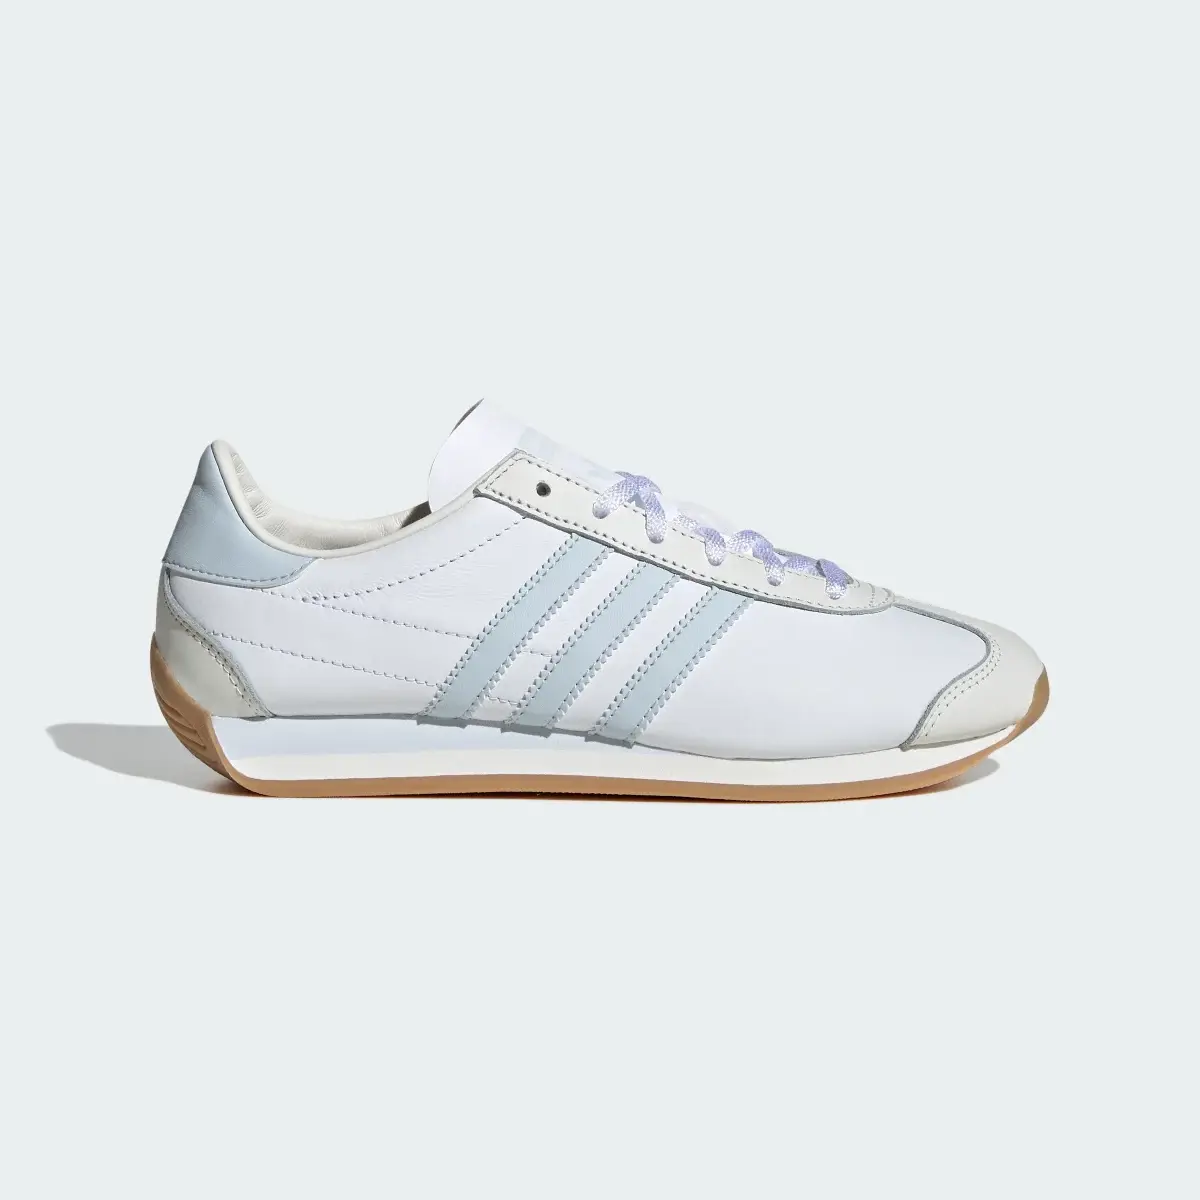 Adidas Country OG Shoes. 2